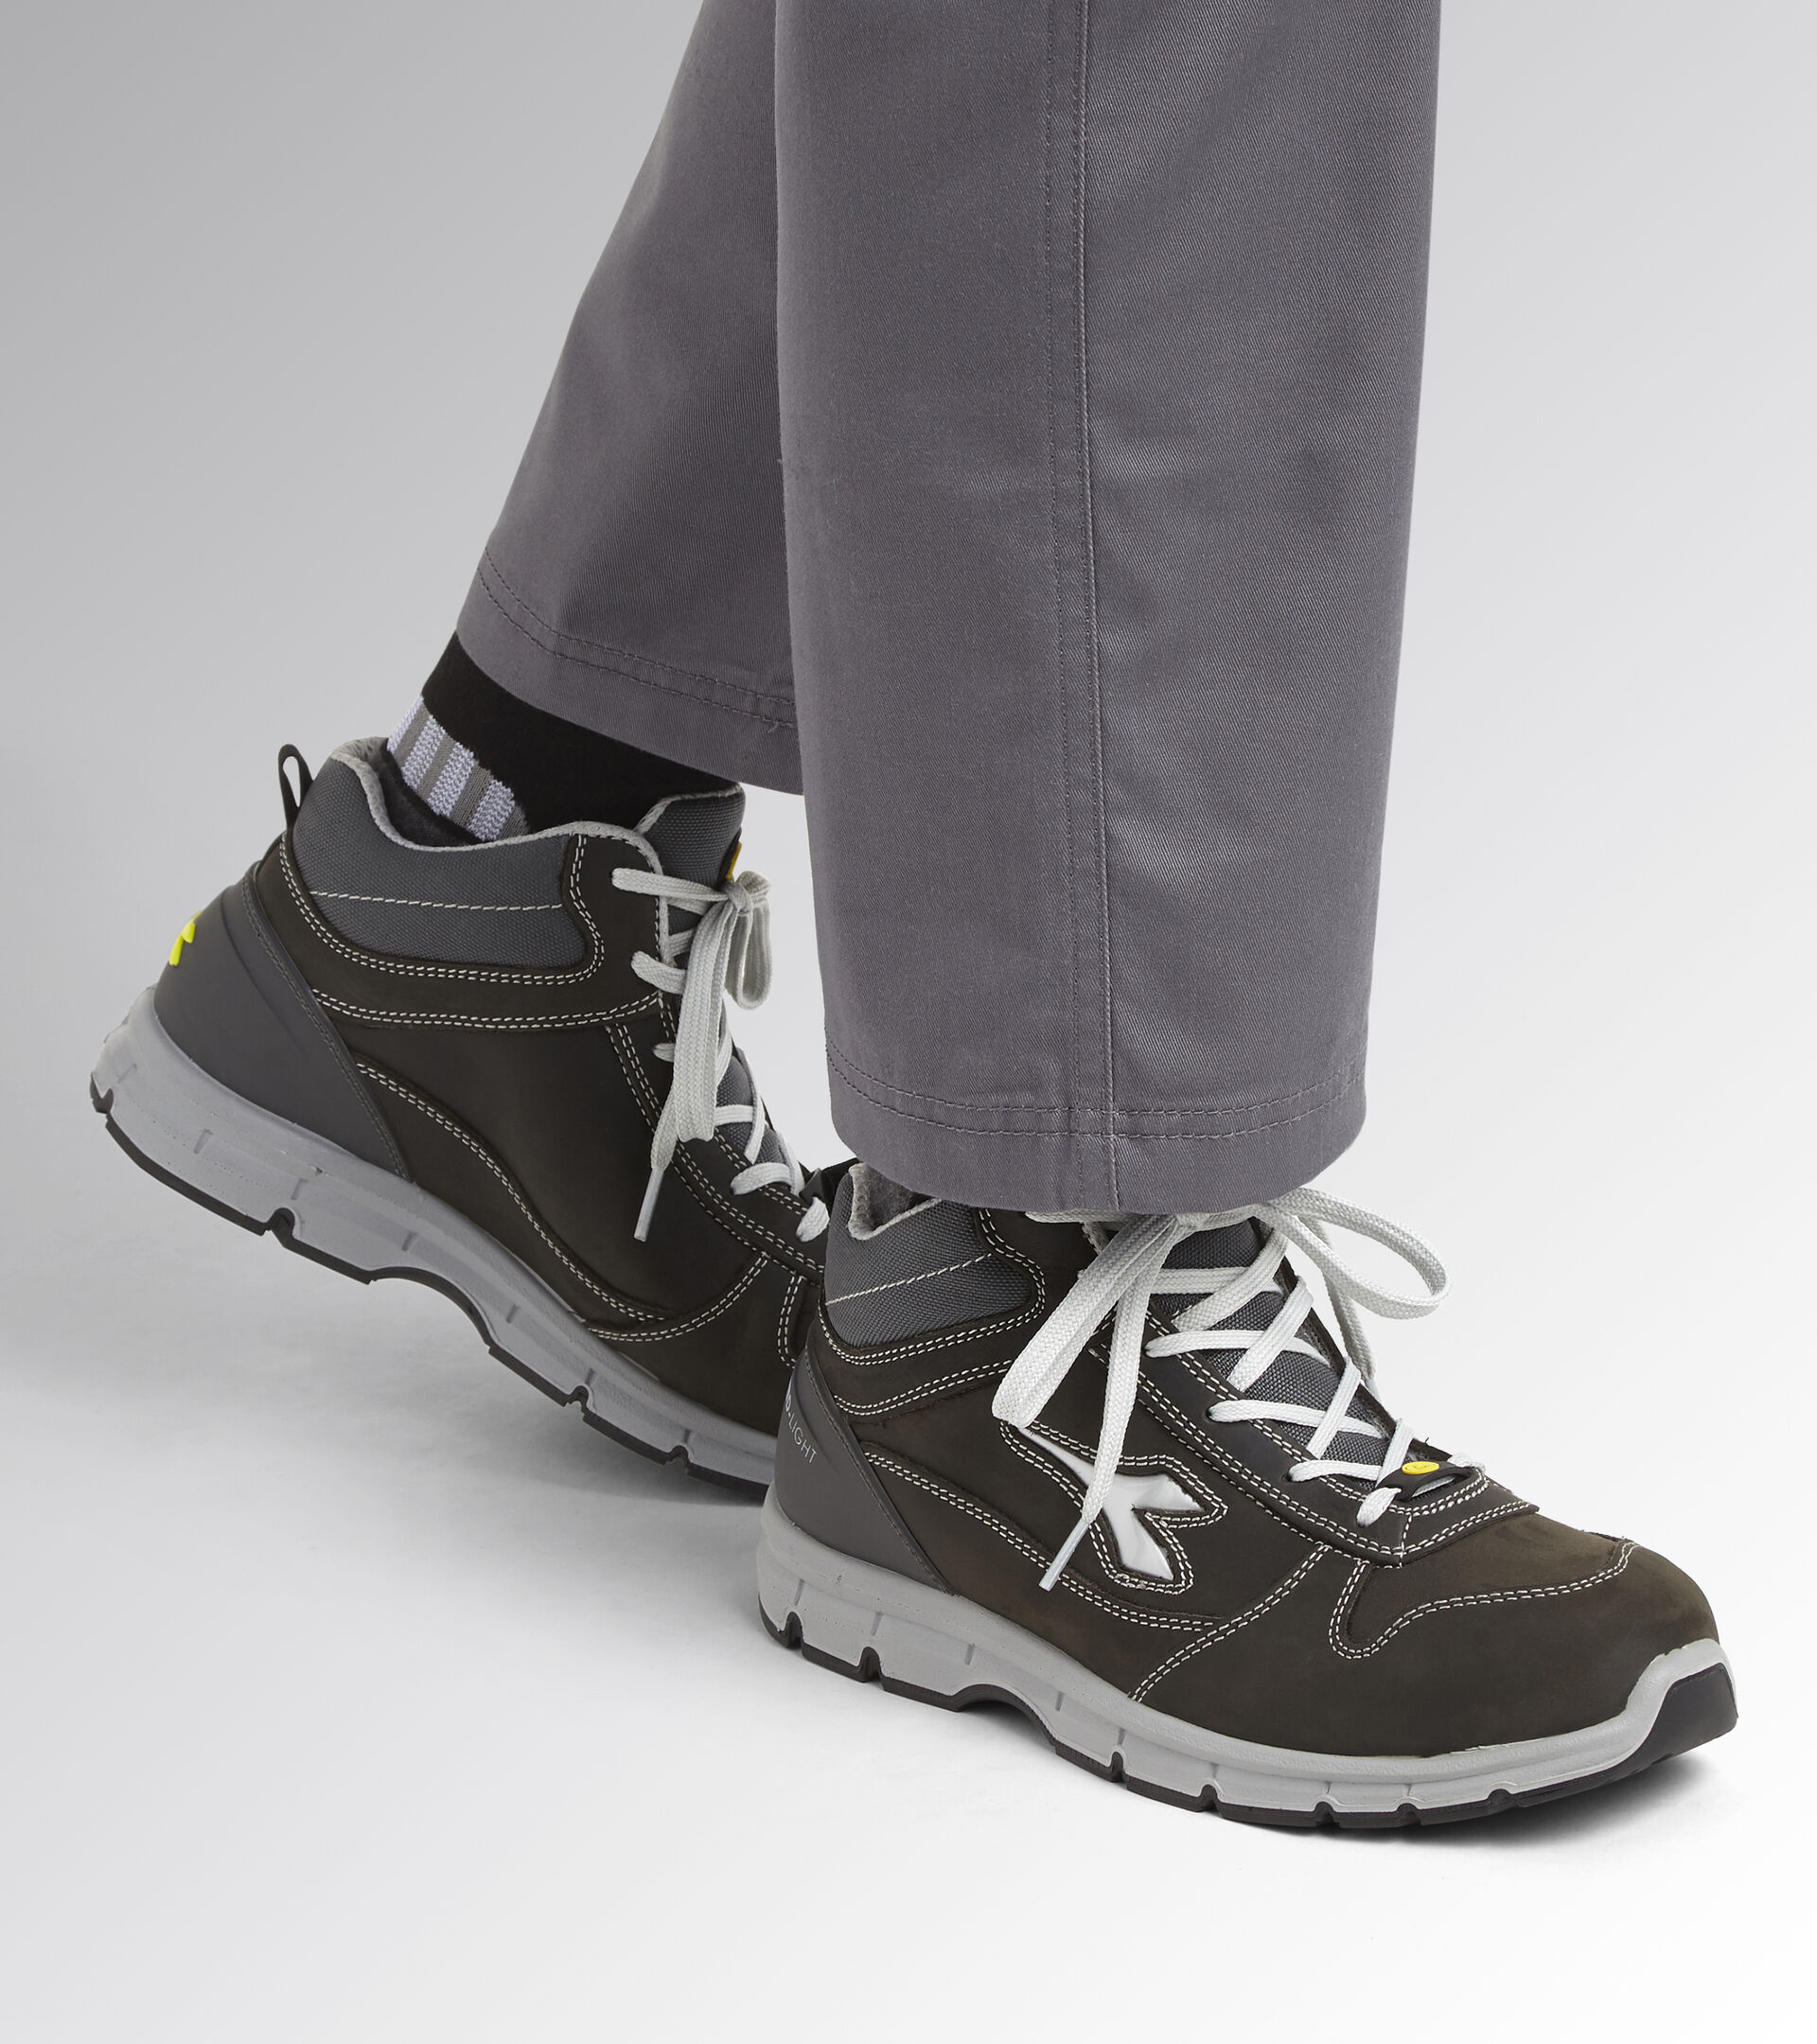 High safety shoe RUN MID S3 SRC ESD CASTLE ROCK - Utility